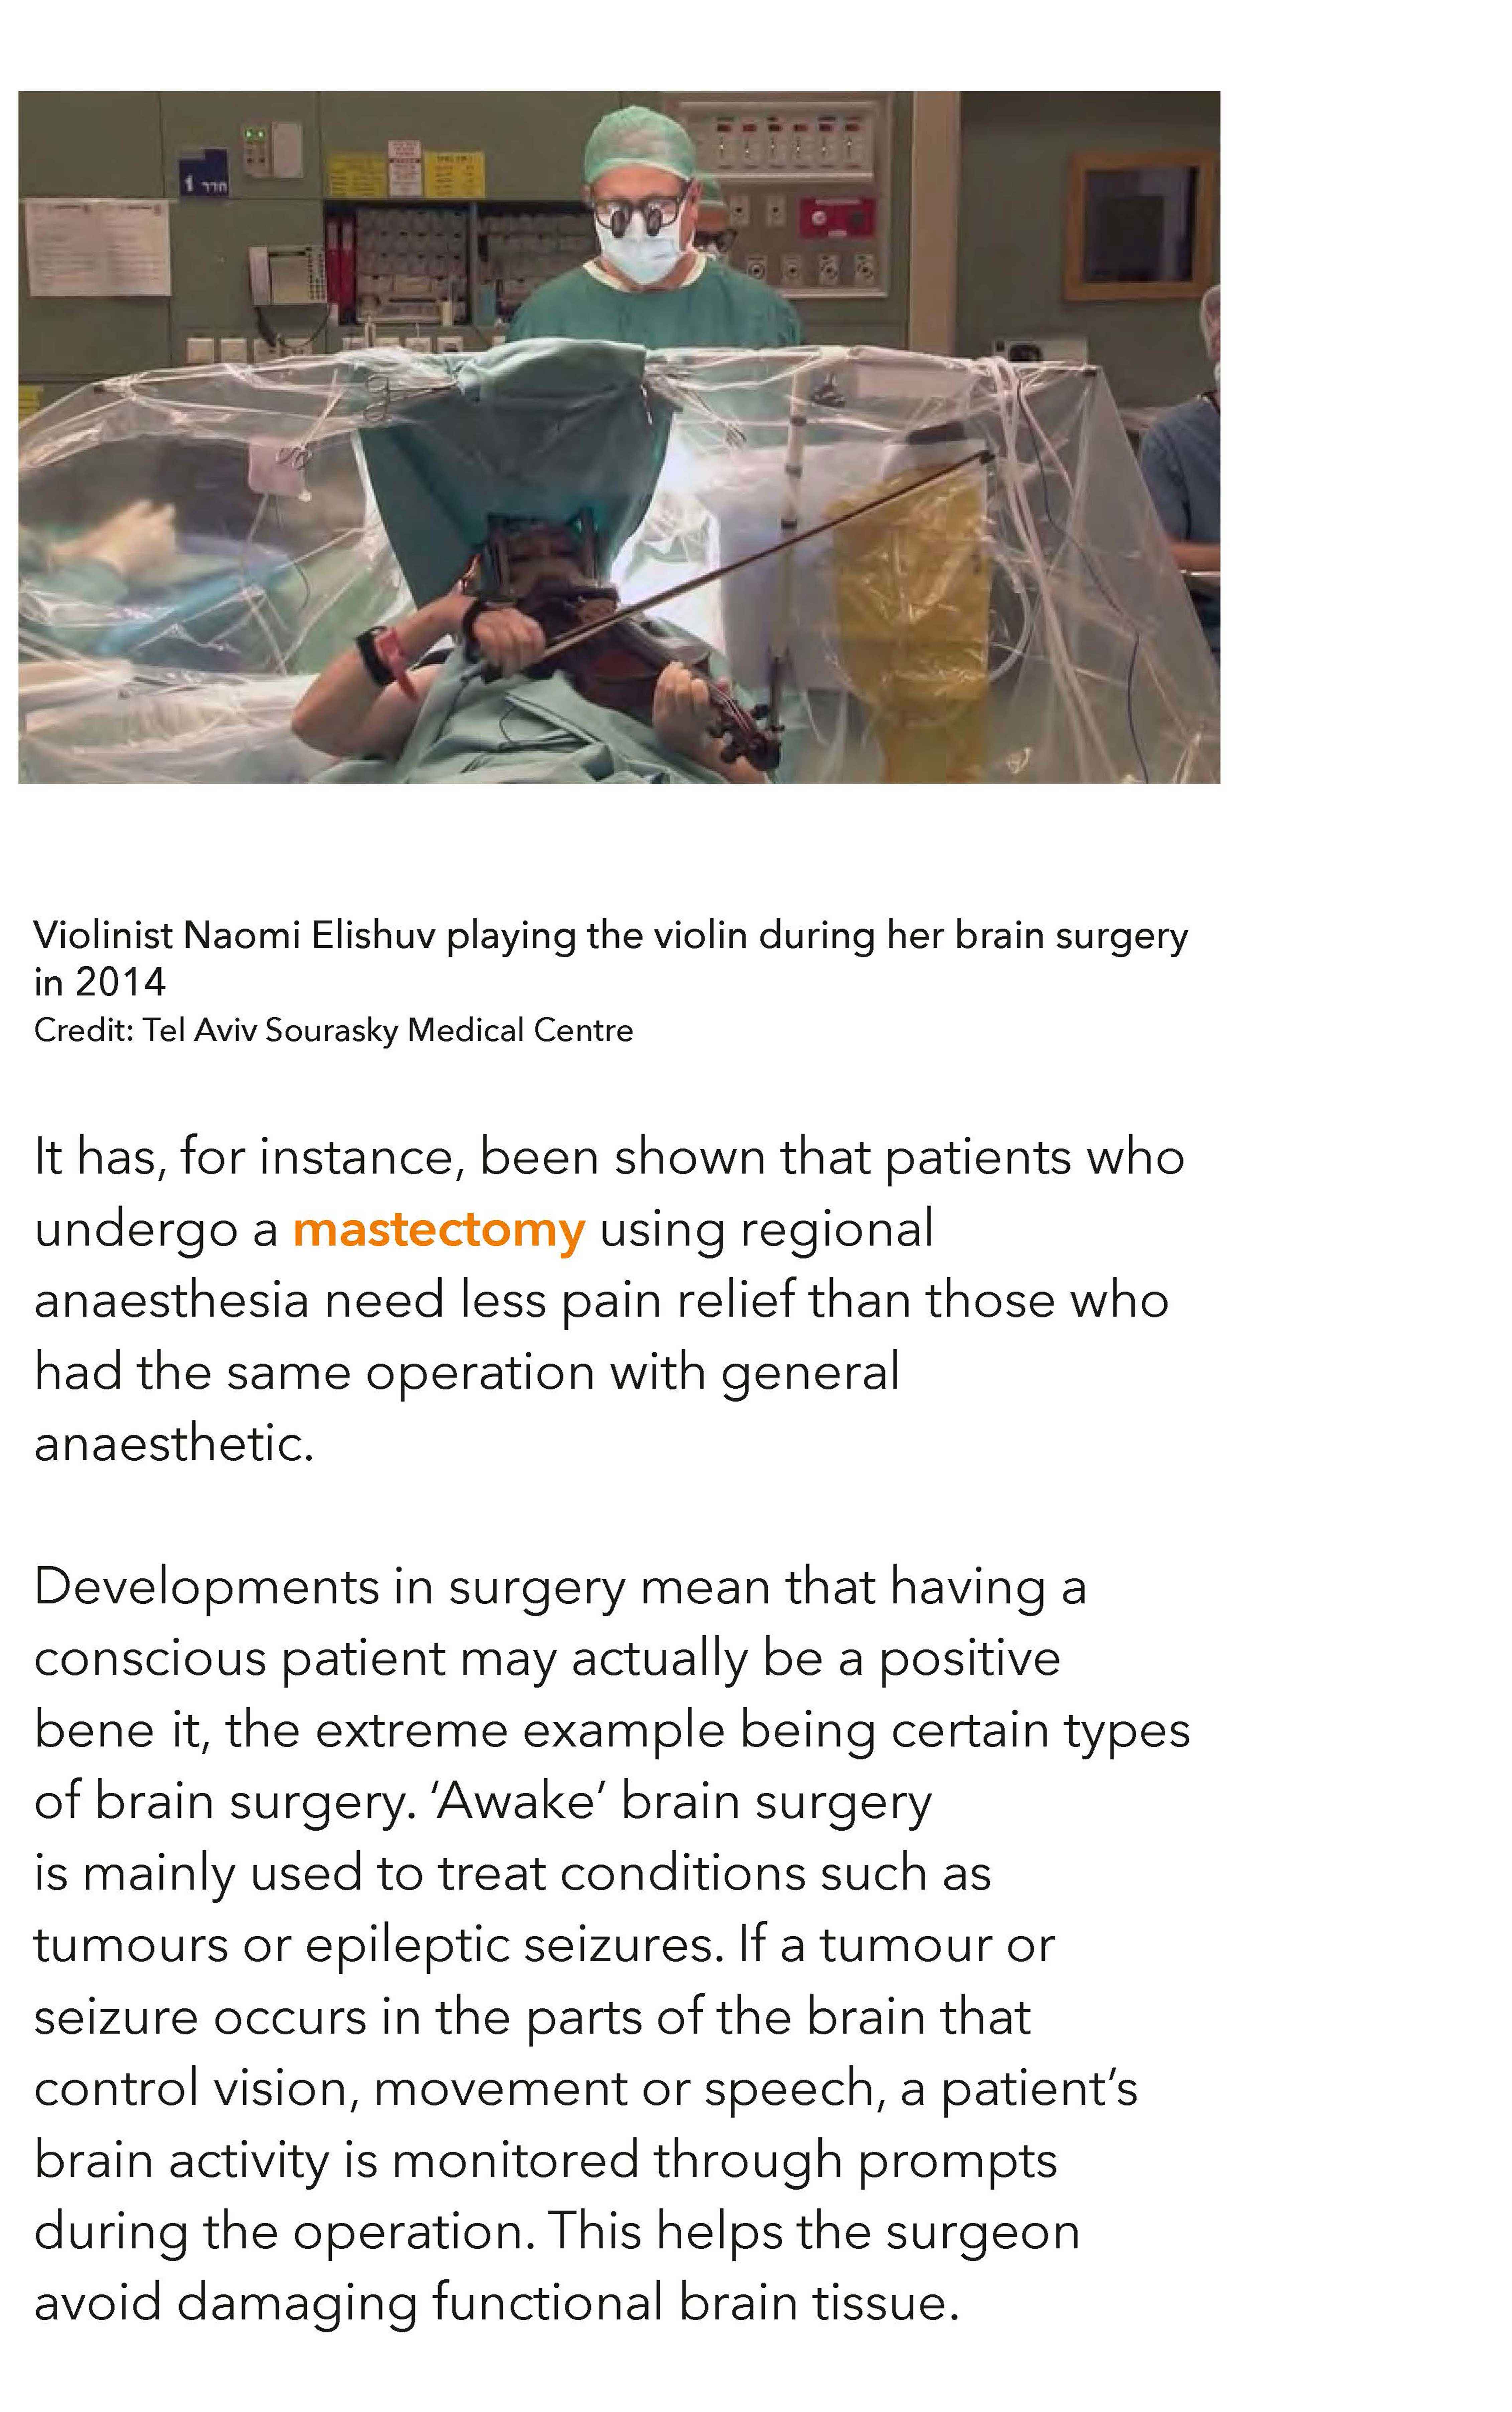 Tel Aviv Sourasky Medical Centre: Violinist Naomi Elishuv playing the violin during her brain surgery in 2014 It has, for instance, been shown that patients who undergo a mastectomy using regional anaesthesia need less pain relief than those who had the same operation with general anaesthetic. Developments in surgery mean that having a conscious patient may actually be a positive benefit, the extreme example being certain types of brain surgery. ‘Awake’ brain surgery is mainly used to treat conditions such as tumours or epileptic seizures. If a tumour or seizure occurs in the parts of the brain that control vision, movement or speech, a patient’s brain activity is monitored through prompts during the operation. This helps the surgeon avoid damaging functional brain tissue.